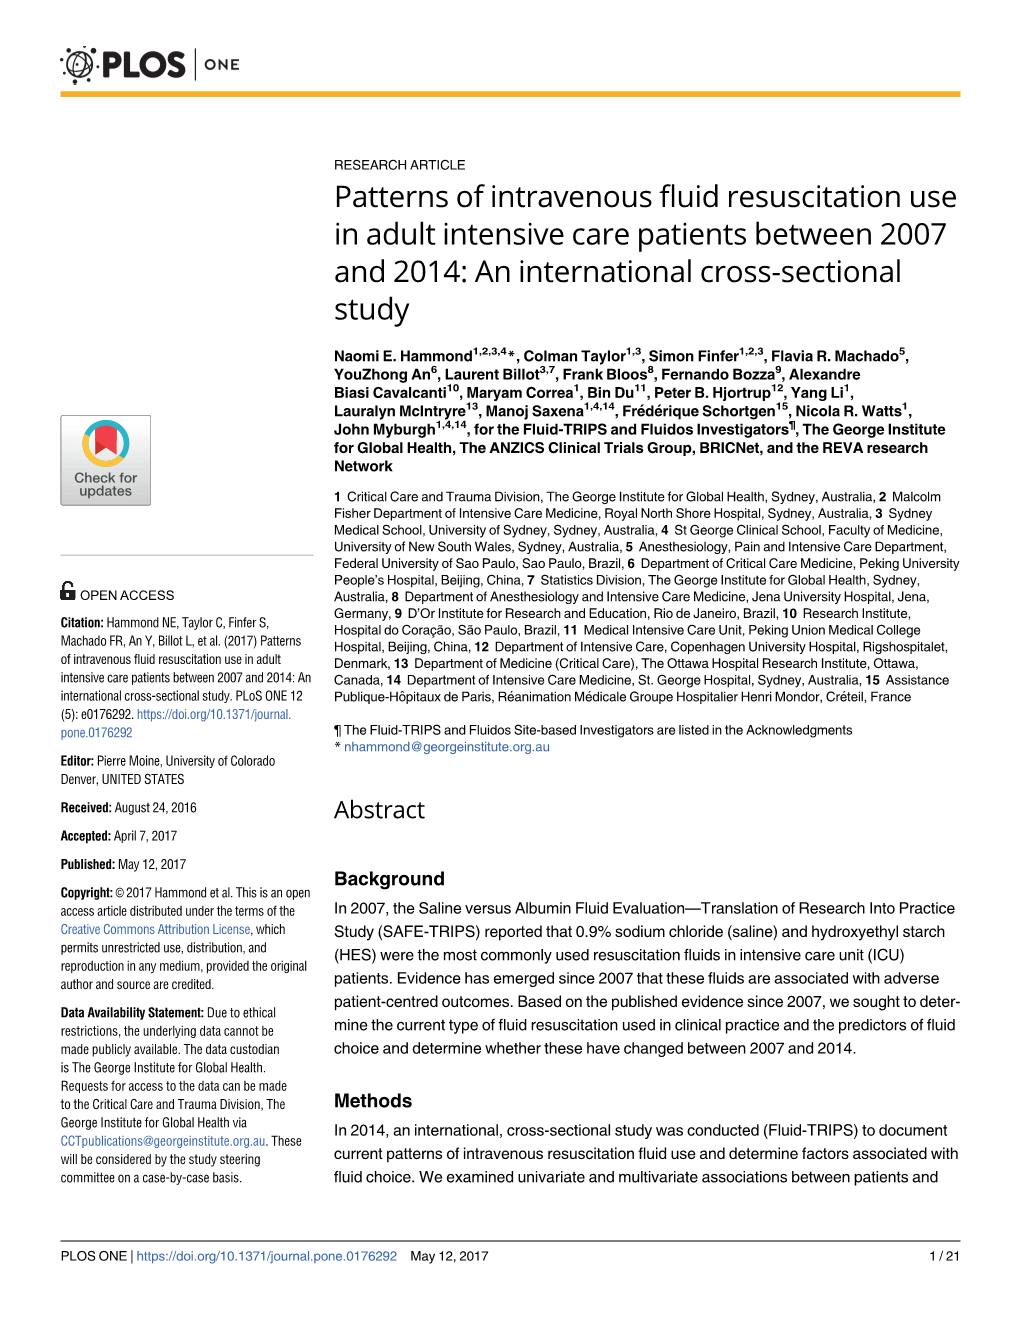 Patterns of Intravenous Fluid Resuscitation Use in Adult Intensive Care Patients Between 2007 and 2014: an International Cross-Sectional Study